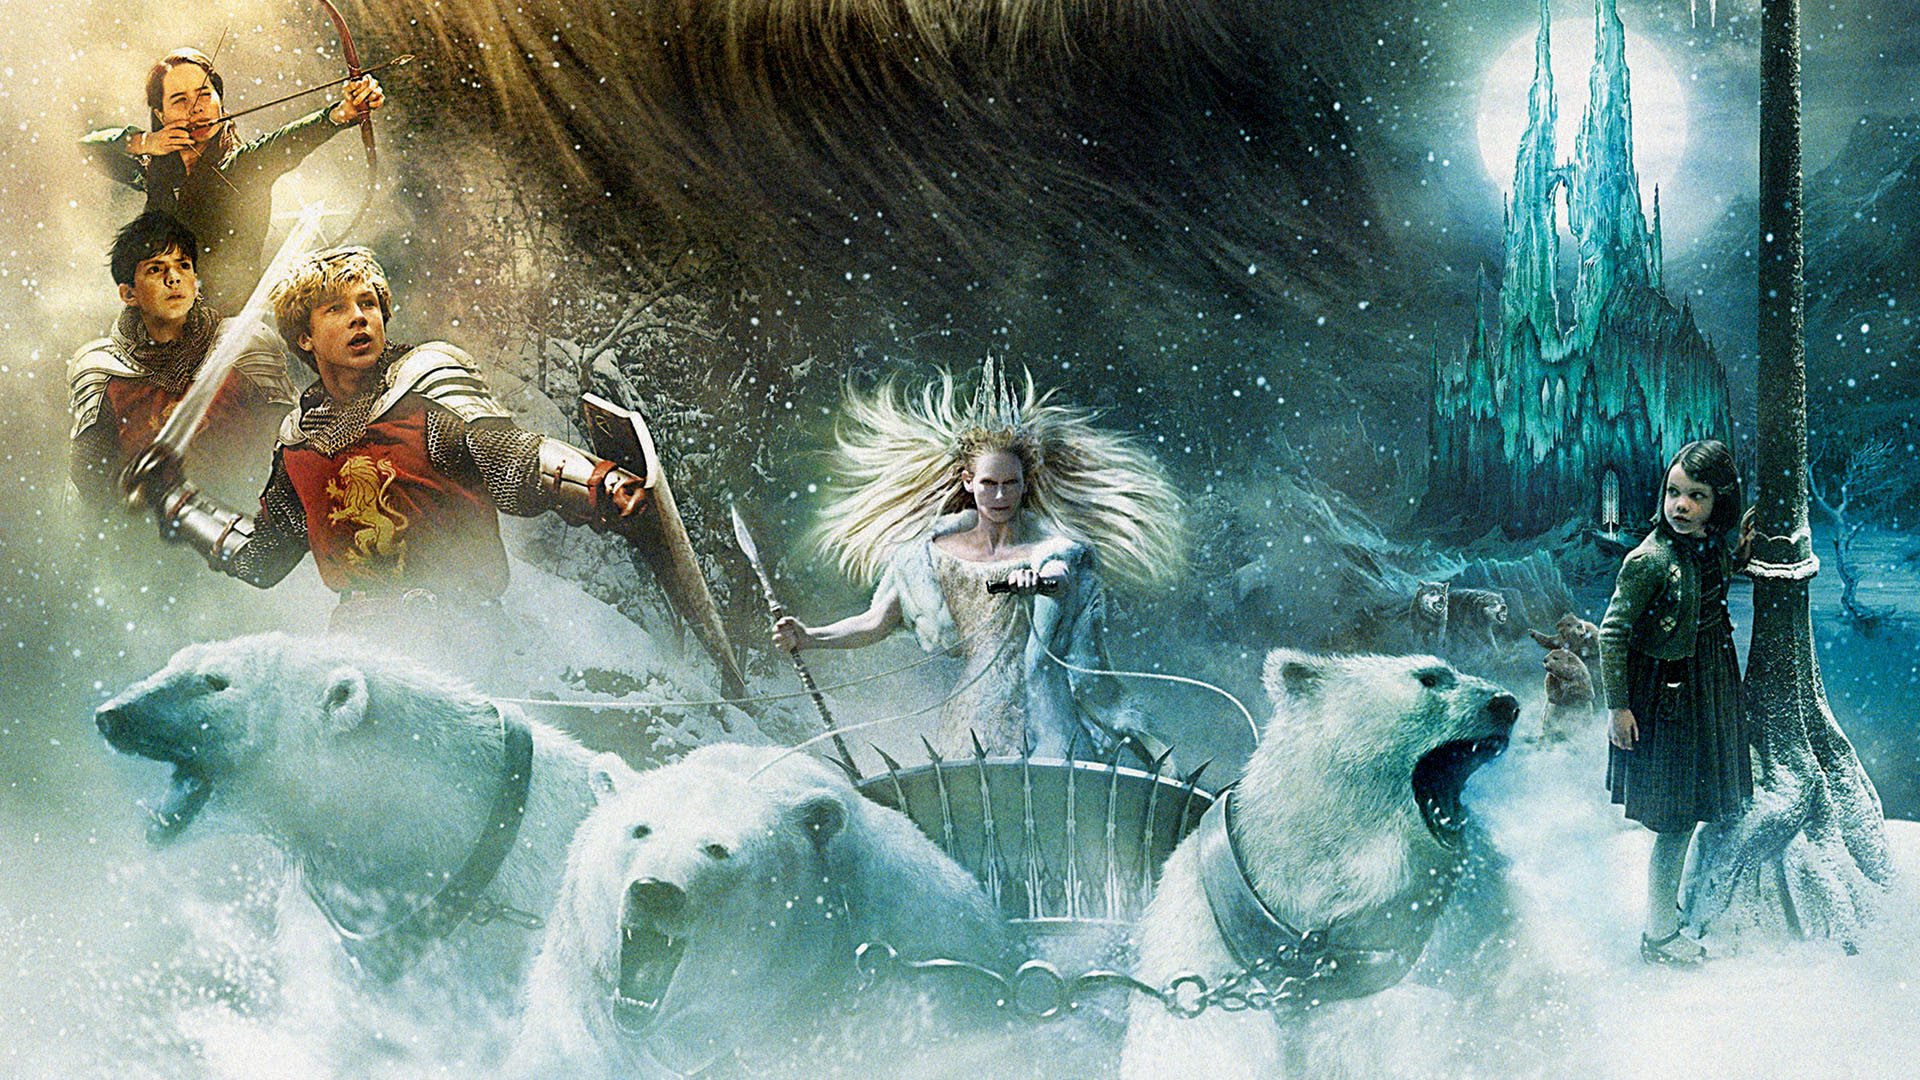 hollywood original movie screen savers wardrobe witch backdrops chronicles narnia lion gallery